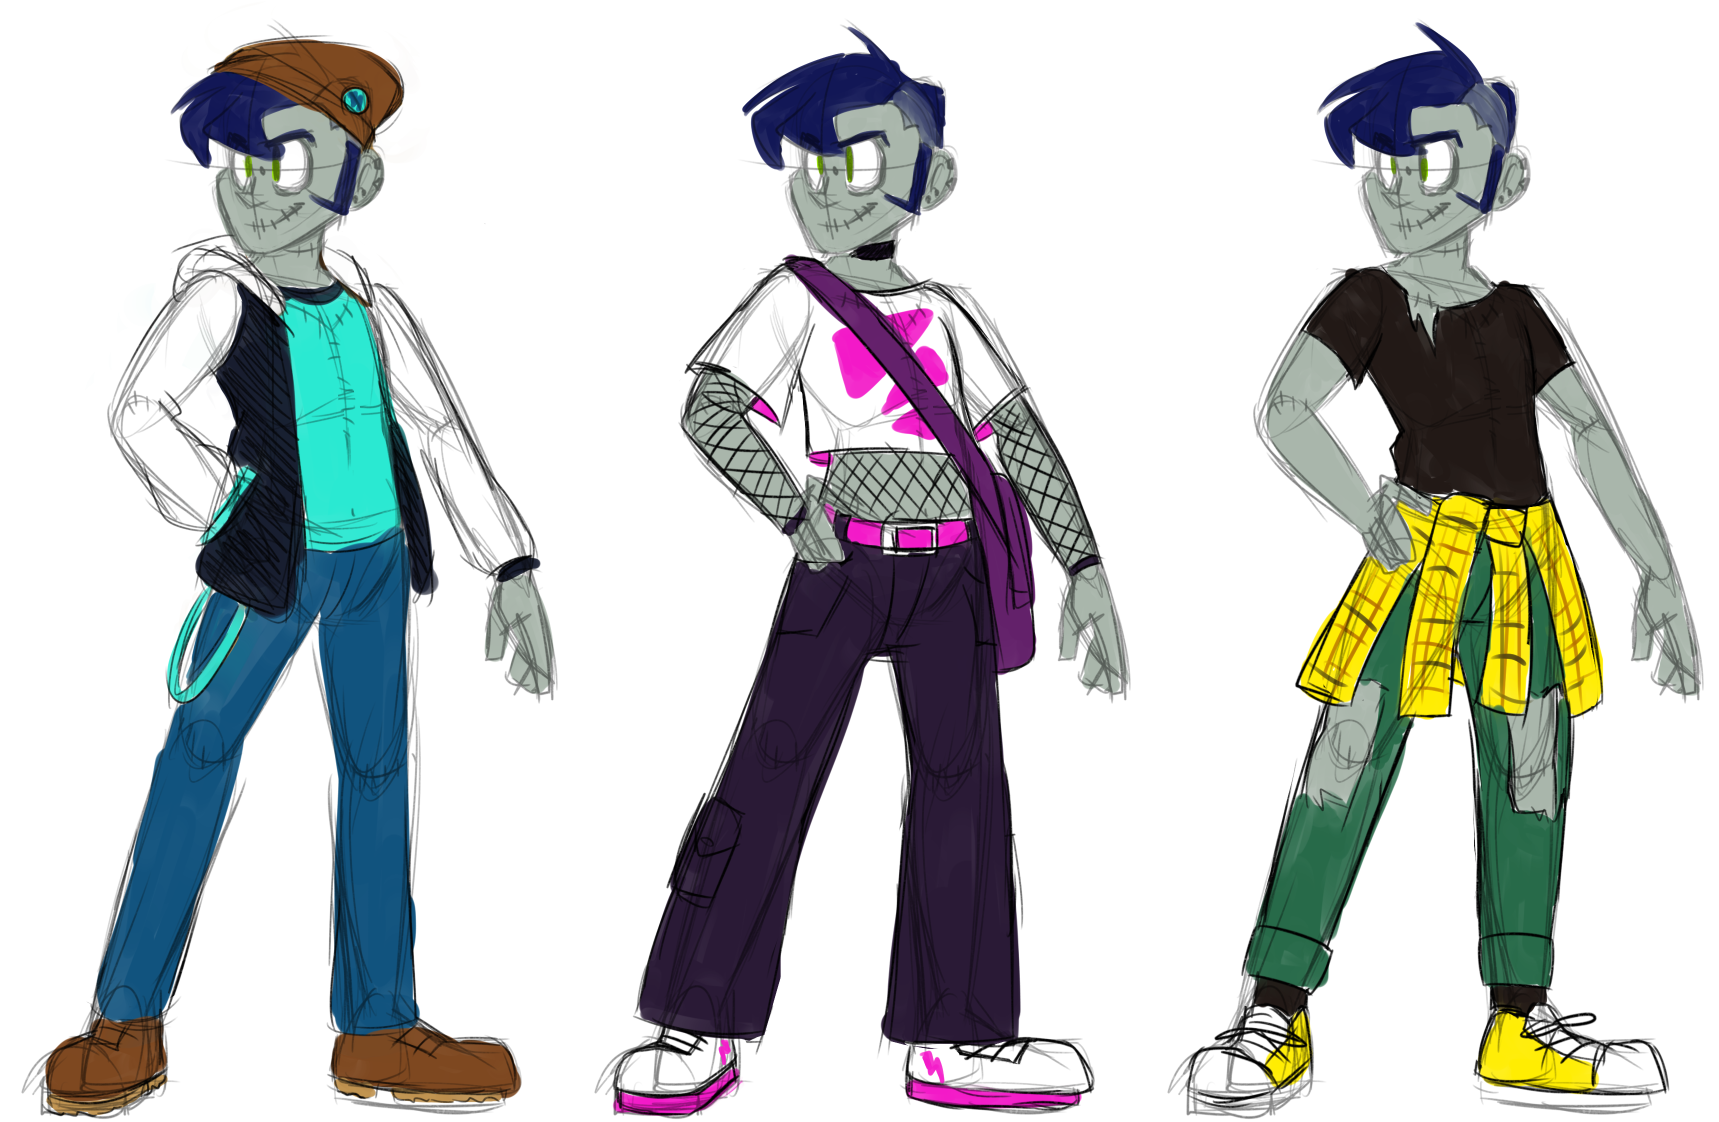 alternate outfit concepts